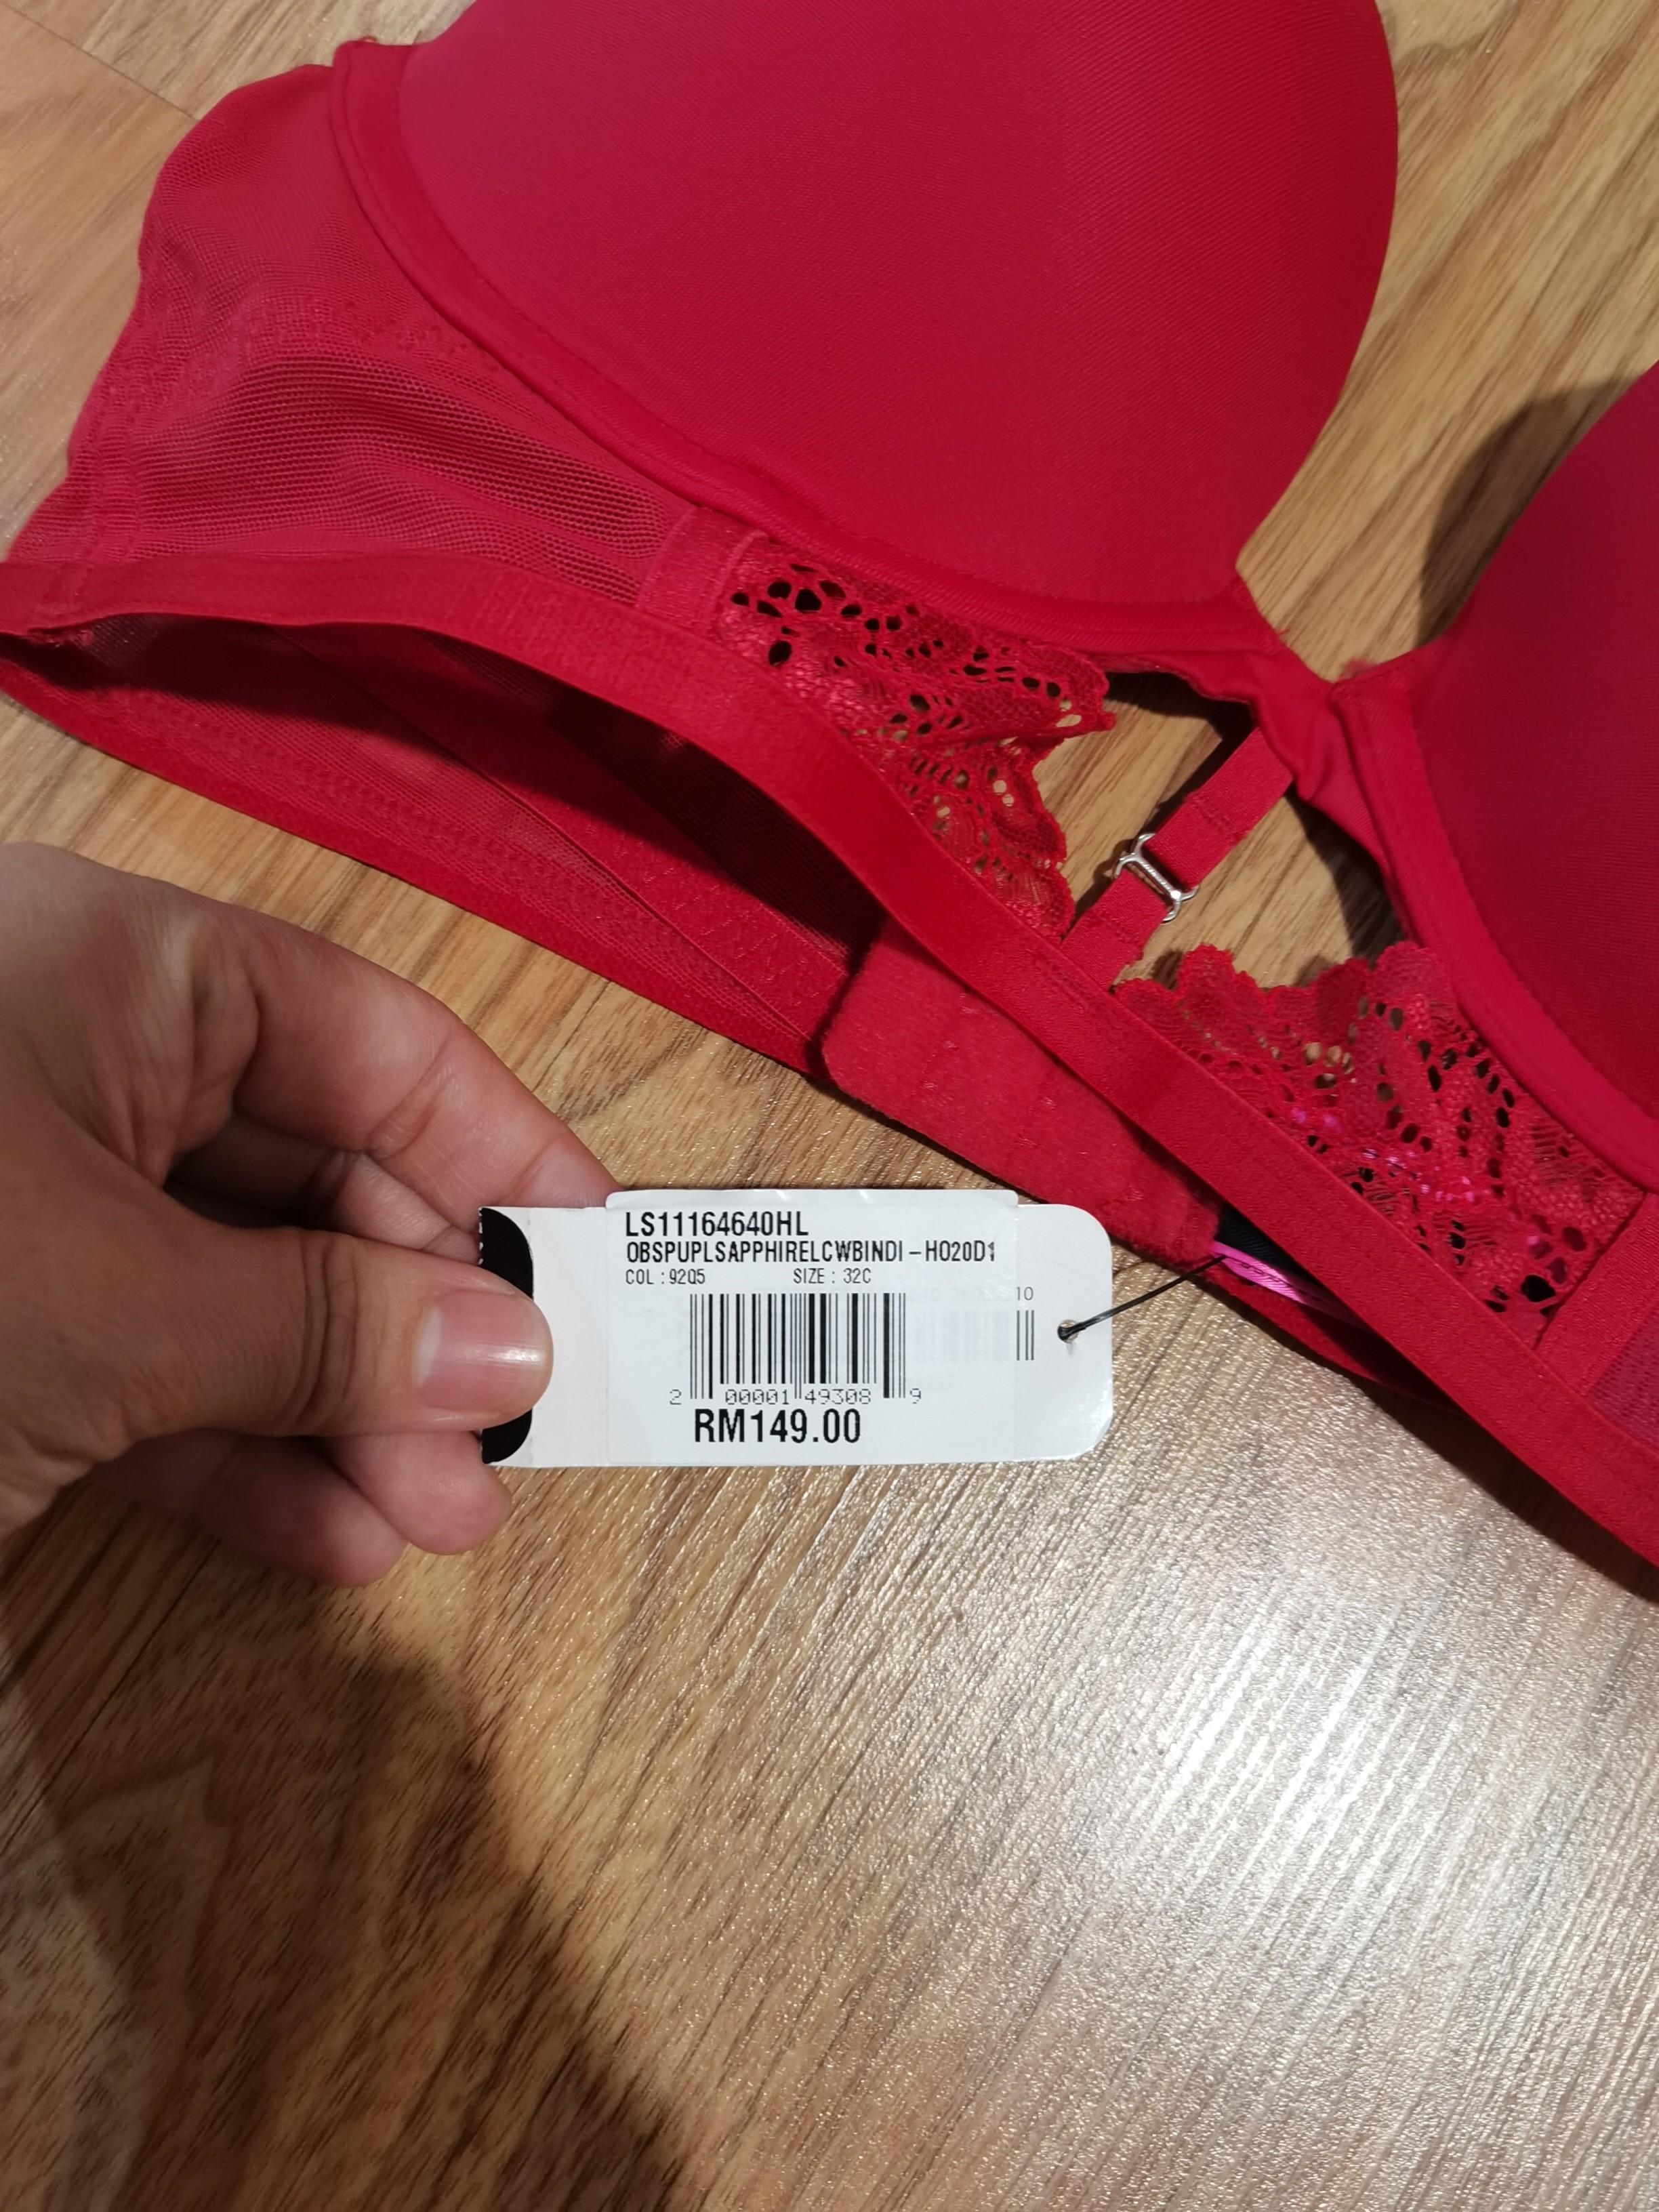 La Senza Bra 34DD Strapless I New With Tags I Used Missing Strap